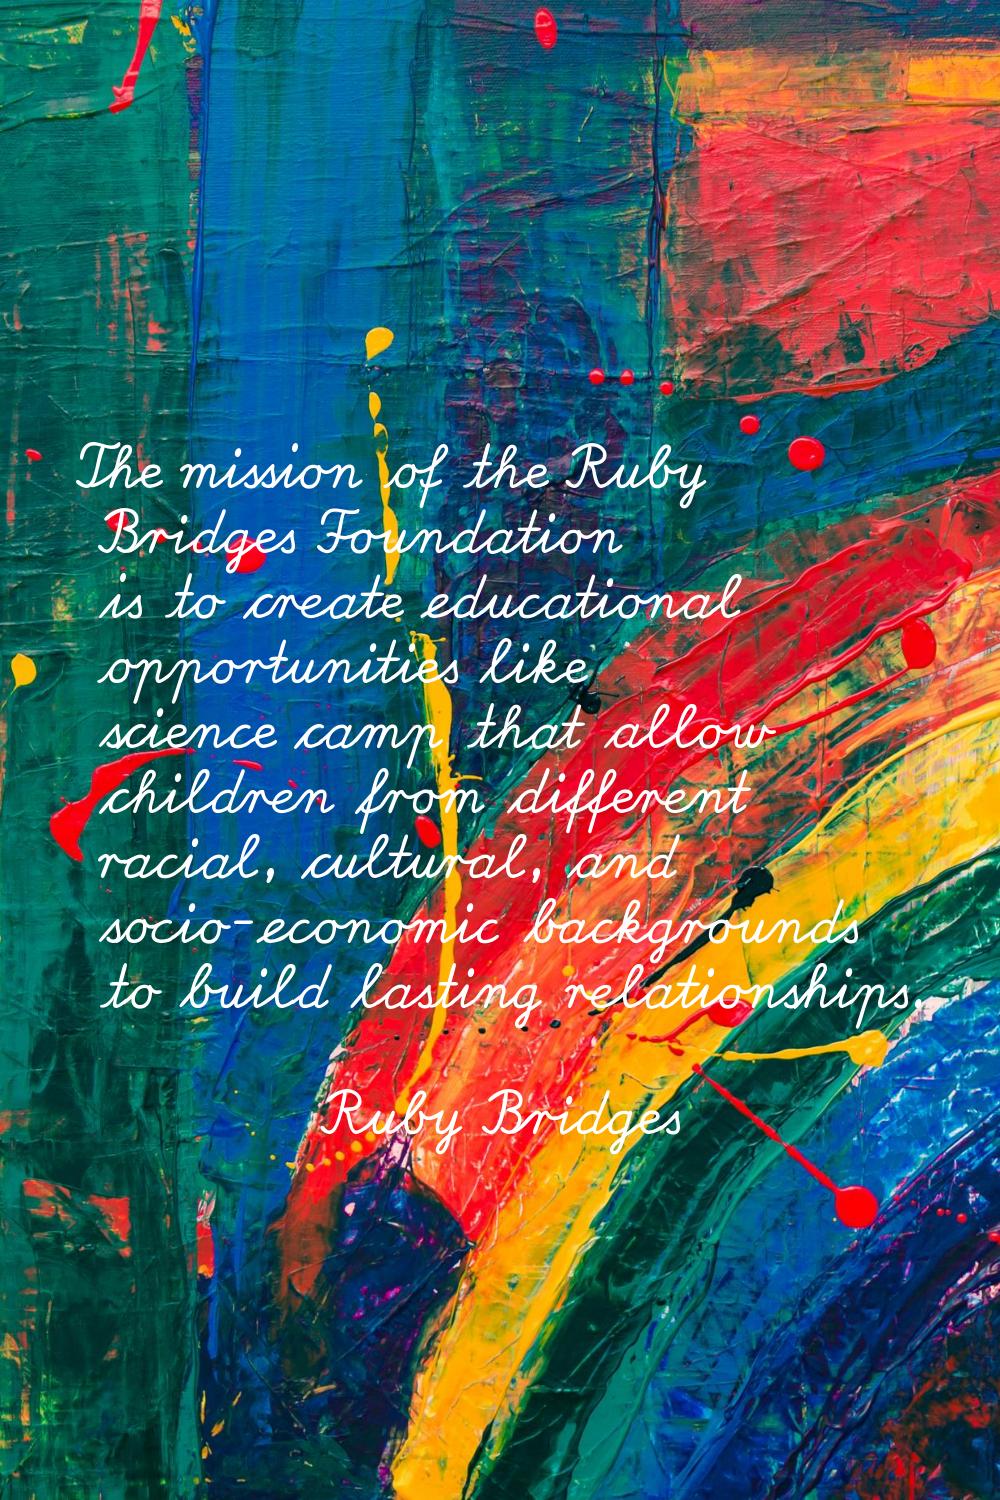 The mission of the Ruby Bridges Foundation is to create educational opportunities like science camp